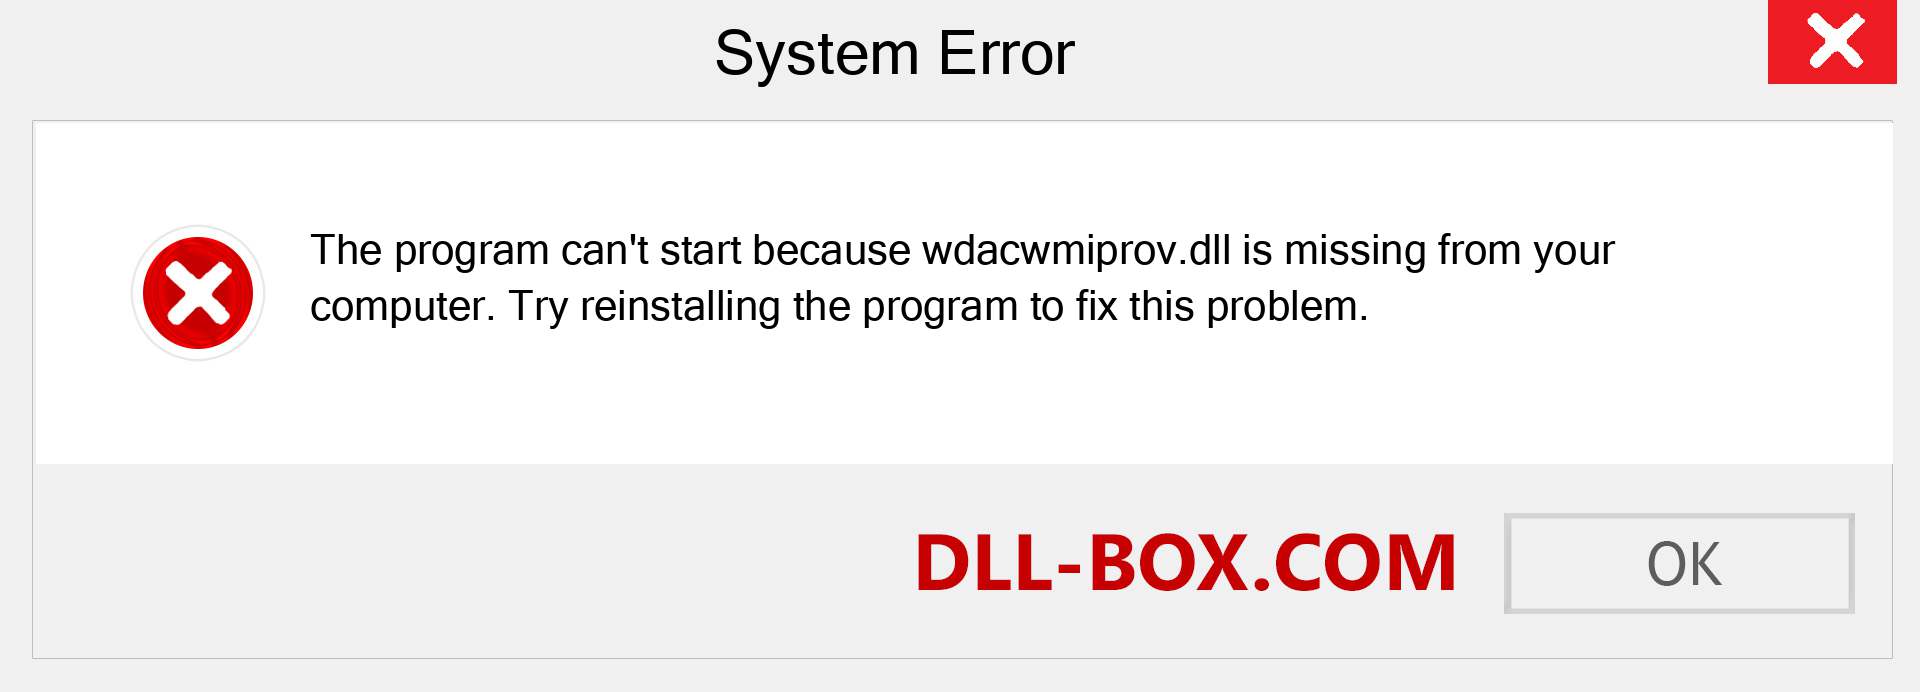  wdacwmiprov.dll file is missing?. Download for Windows 7, 8, 10 - Fix  wdacwmiprov dll Missing Error on Windows, photos, images